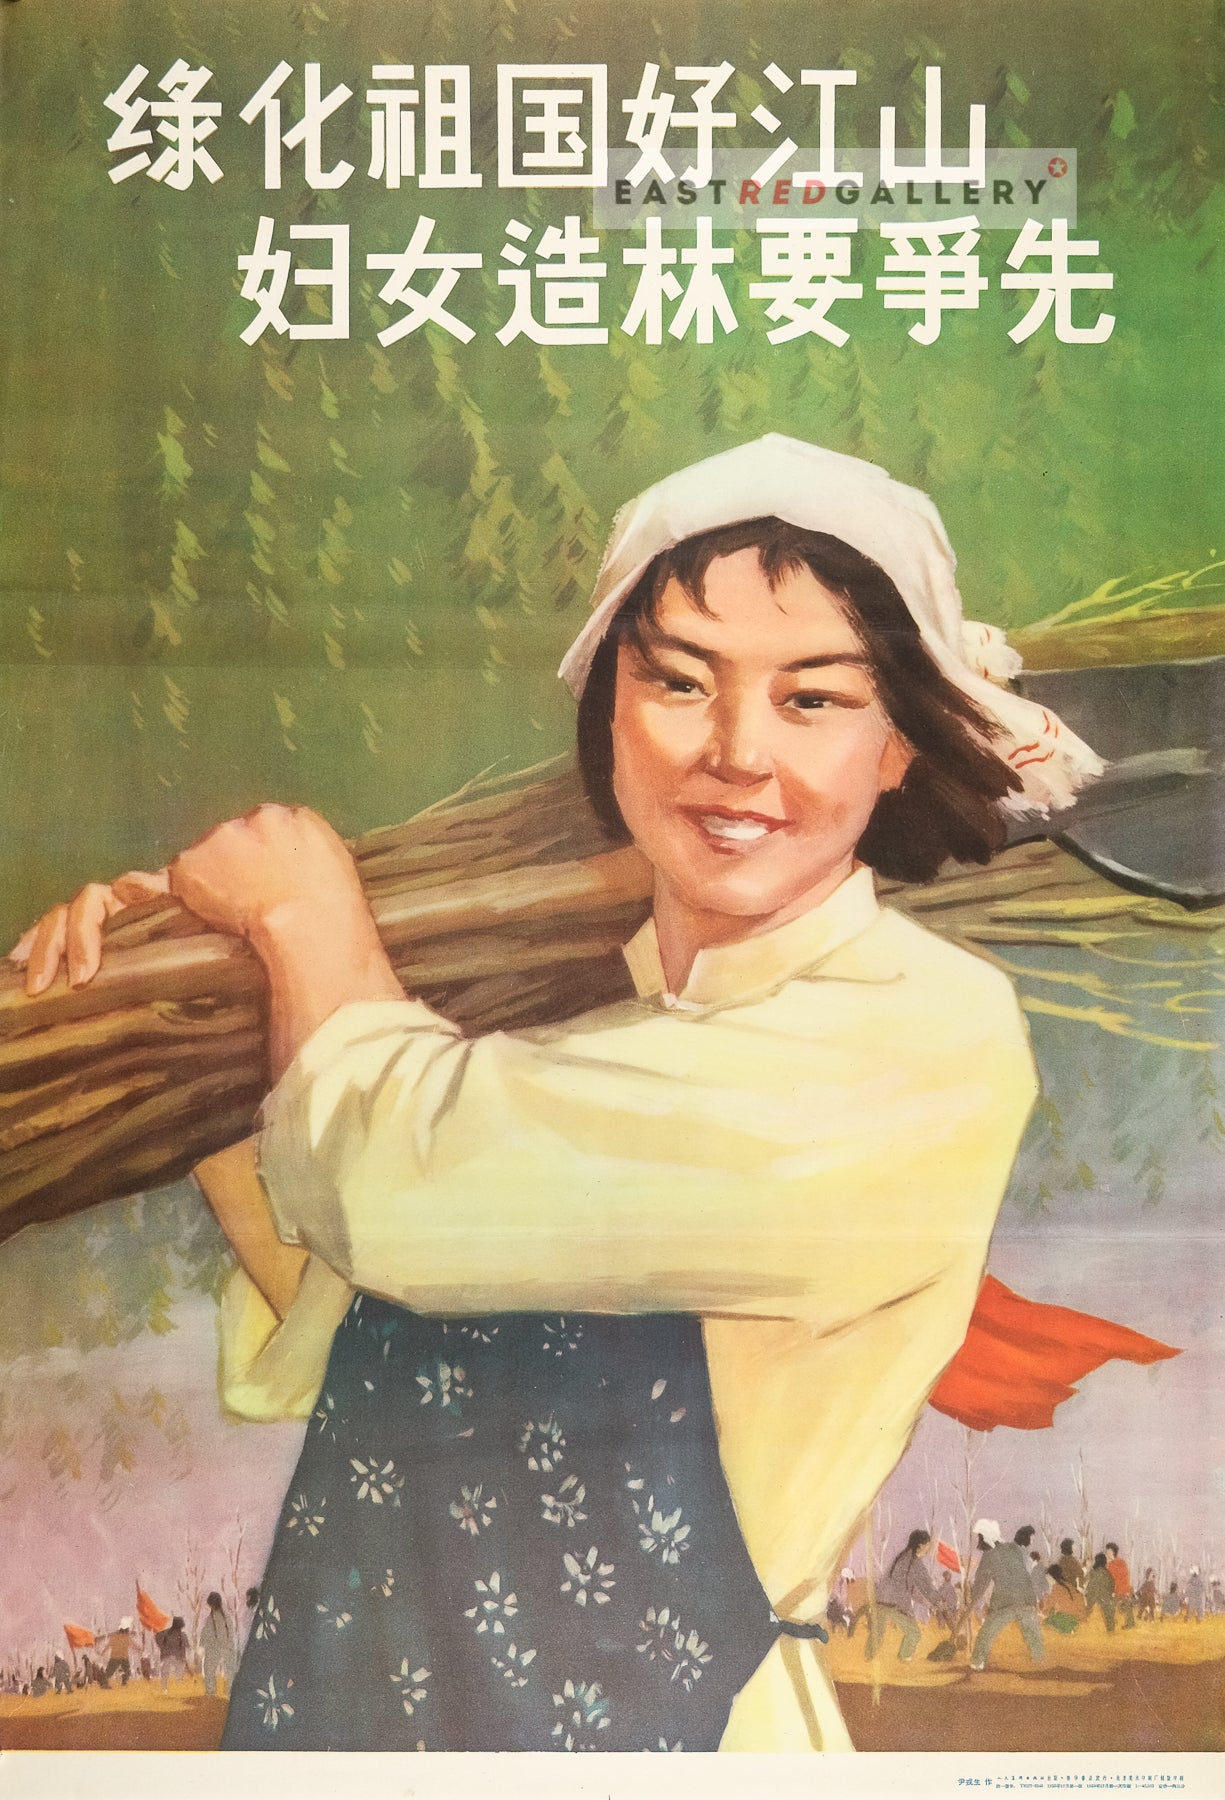 image of 1958 Chinese poster Greenification is good for the motherland, women must forge ahead in afforestation